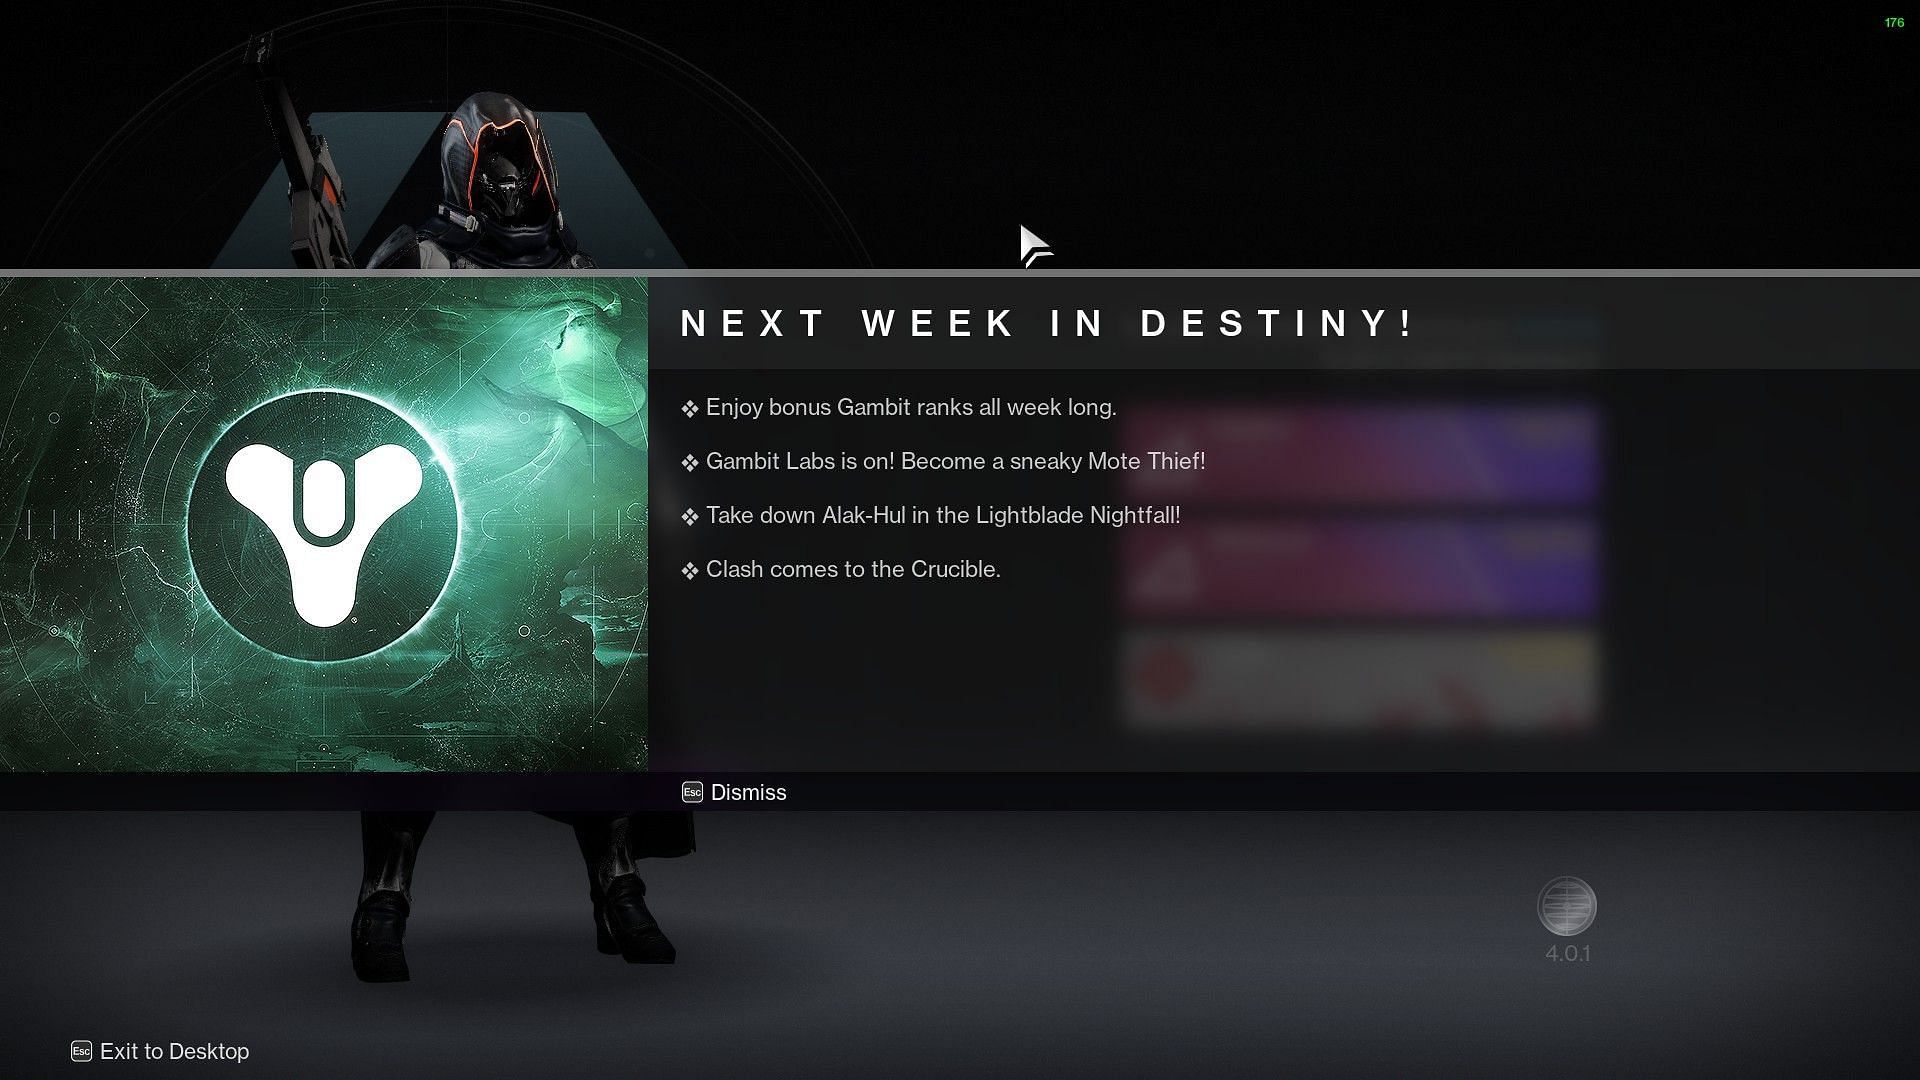 Upcoming content in Destiny 2 week 10 (Image via Bungie)